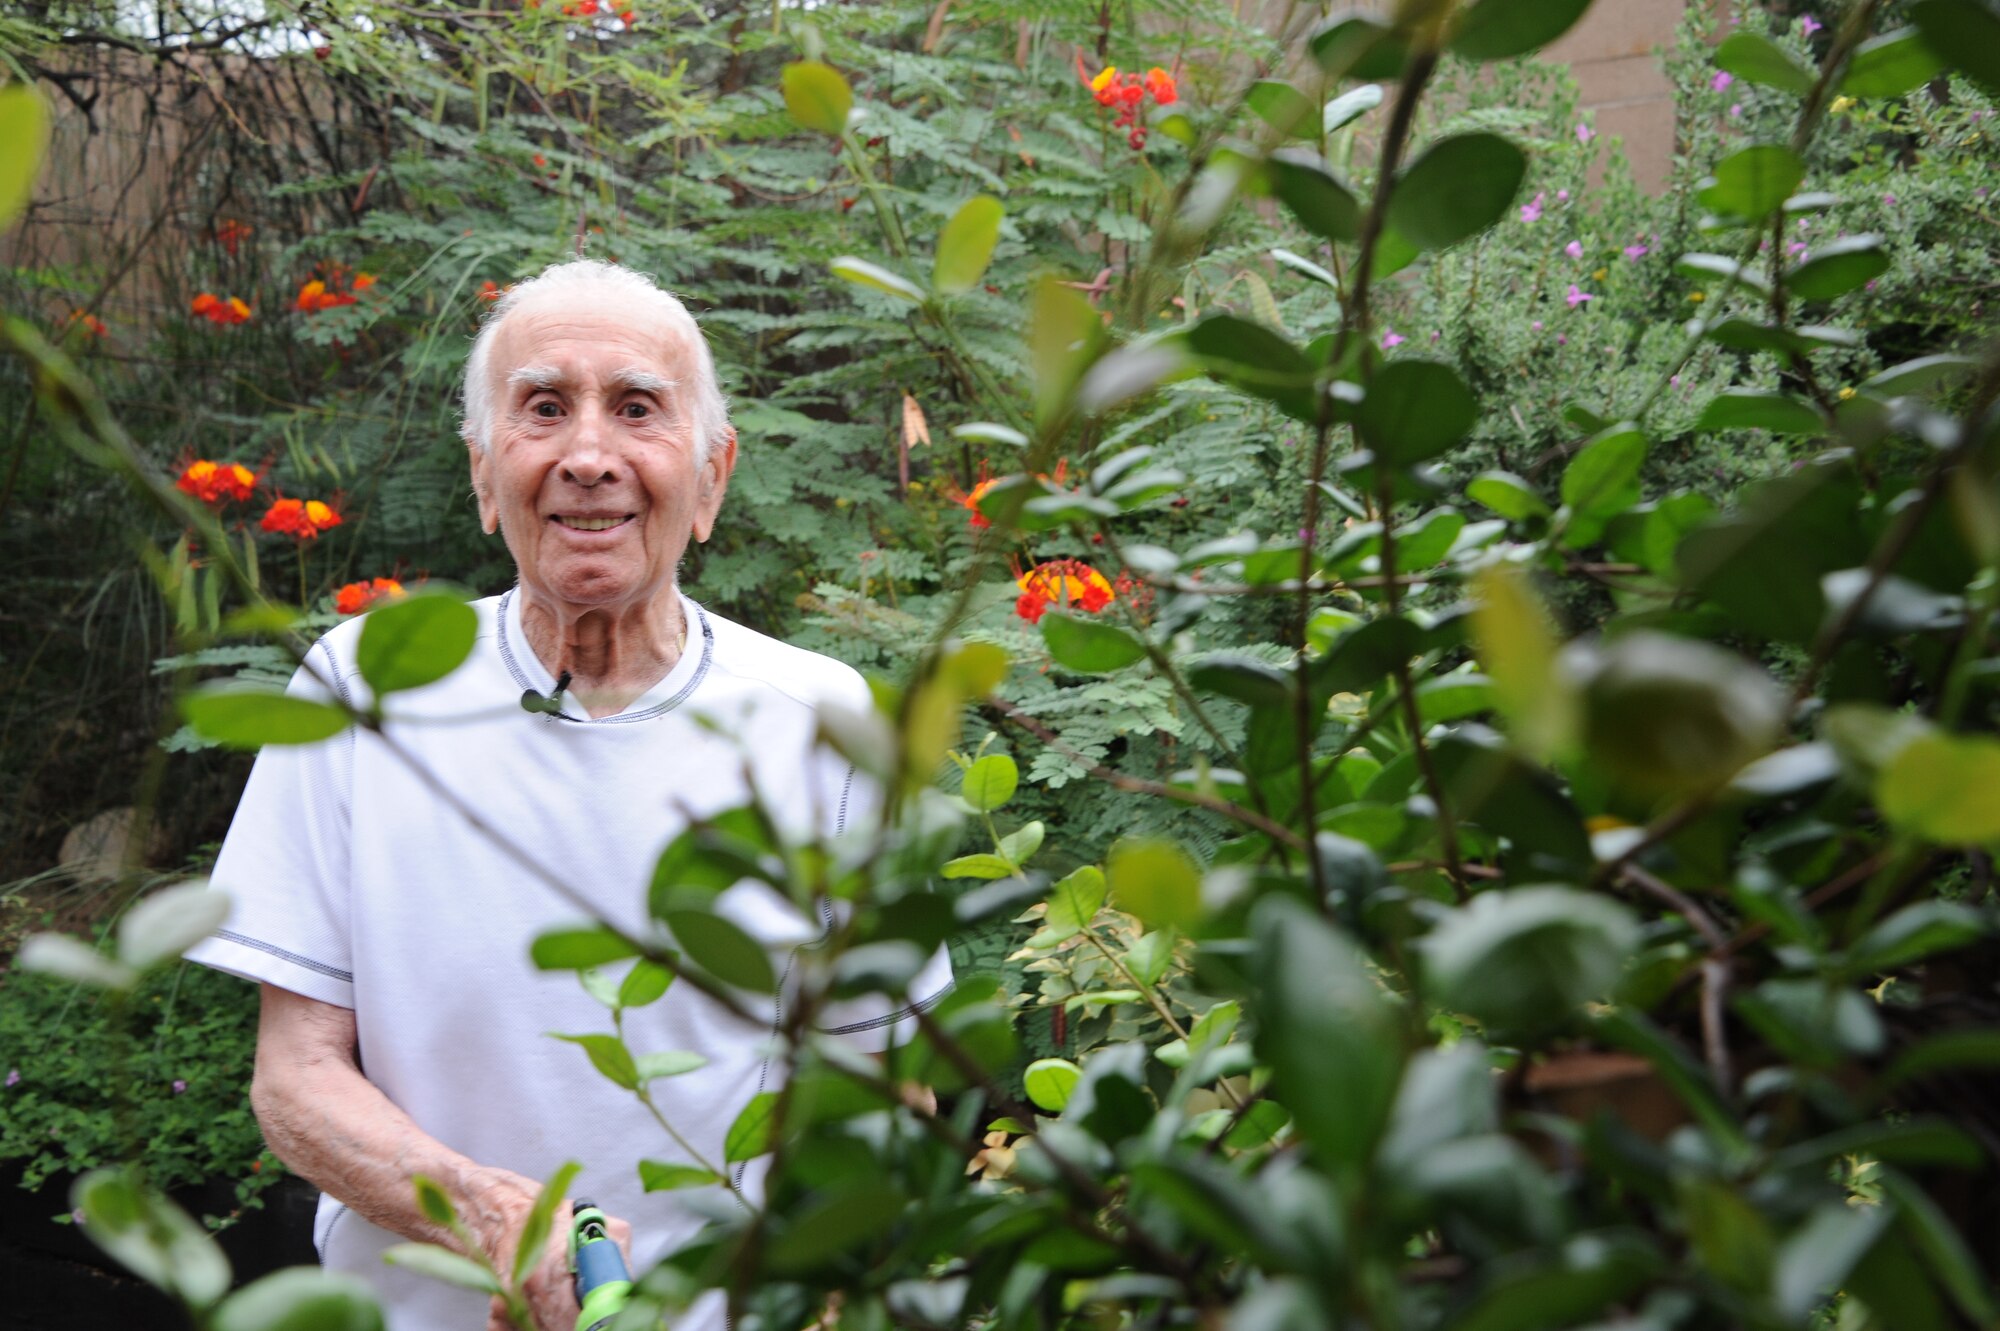 U.S. Army Pvt. Tony Gargano, World War II prisoner of war, waters flowers in his back yard in Tucson, Ariz., Sept. 10, 2015. Gargano keeps himself active and healthy by doing yard work and gardening each day, at the age of 92.  (U.S. Air Force photo by Airman 1st Class Ashley N. Steffen/Released)